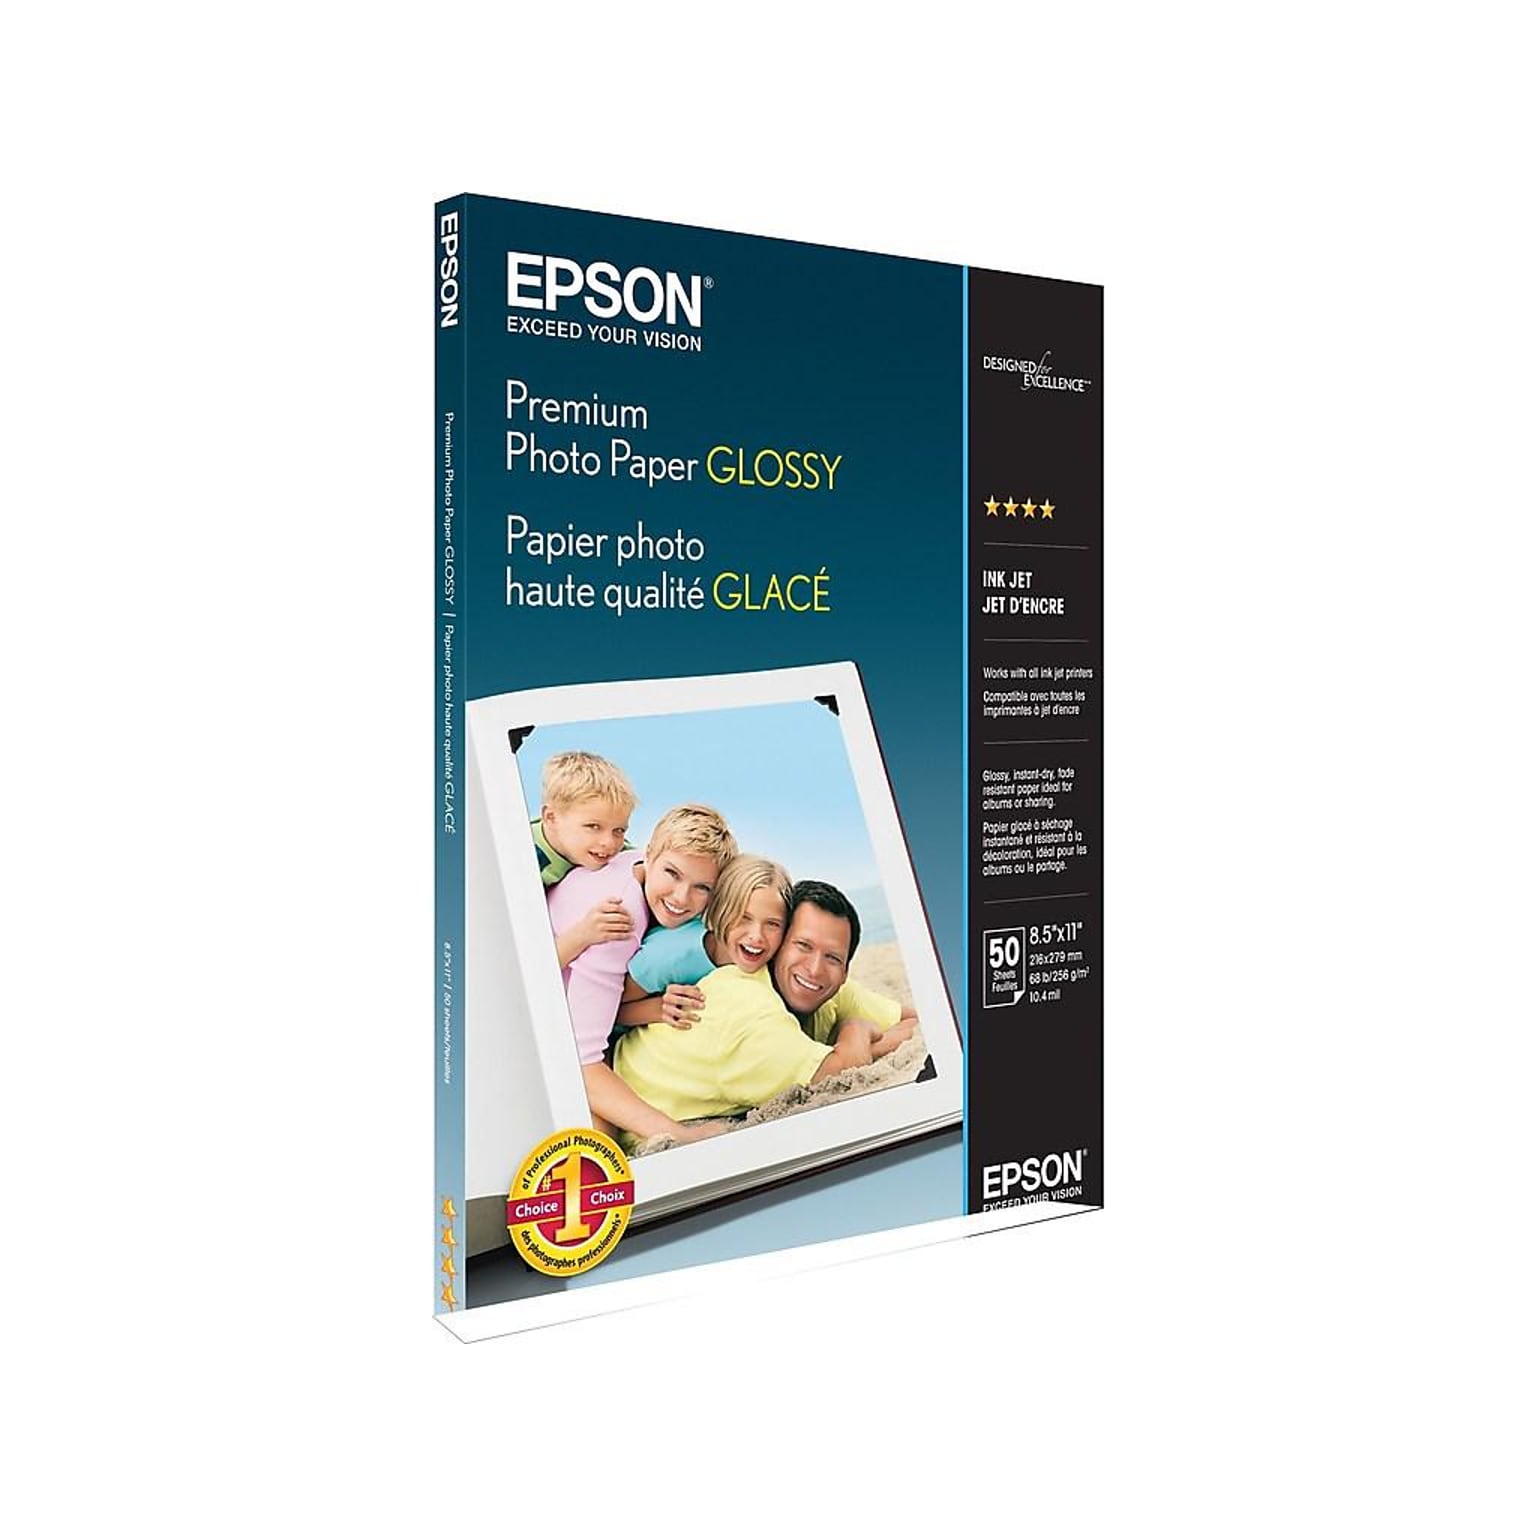 Epson Premium Glossy Photo Paper, 8.5 x 11, 50 Sheets/Pack (S041667)